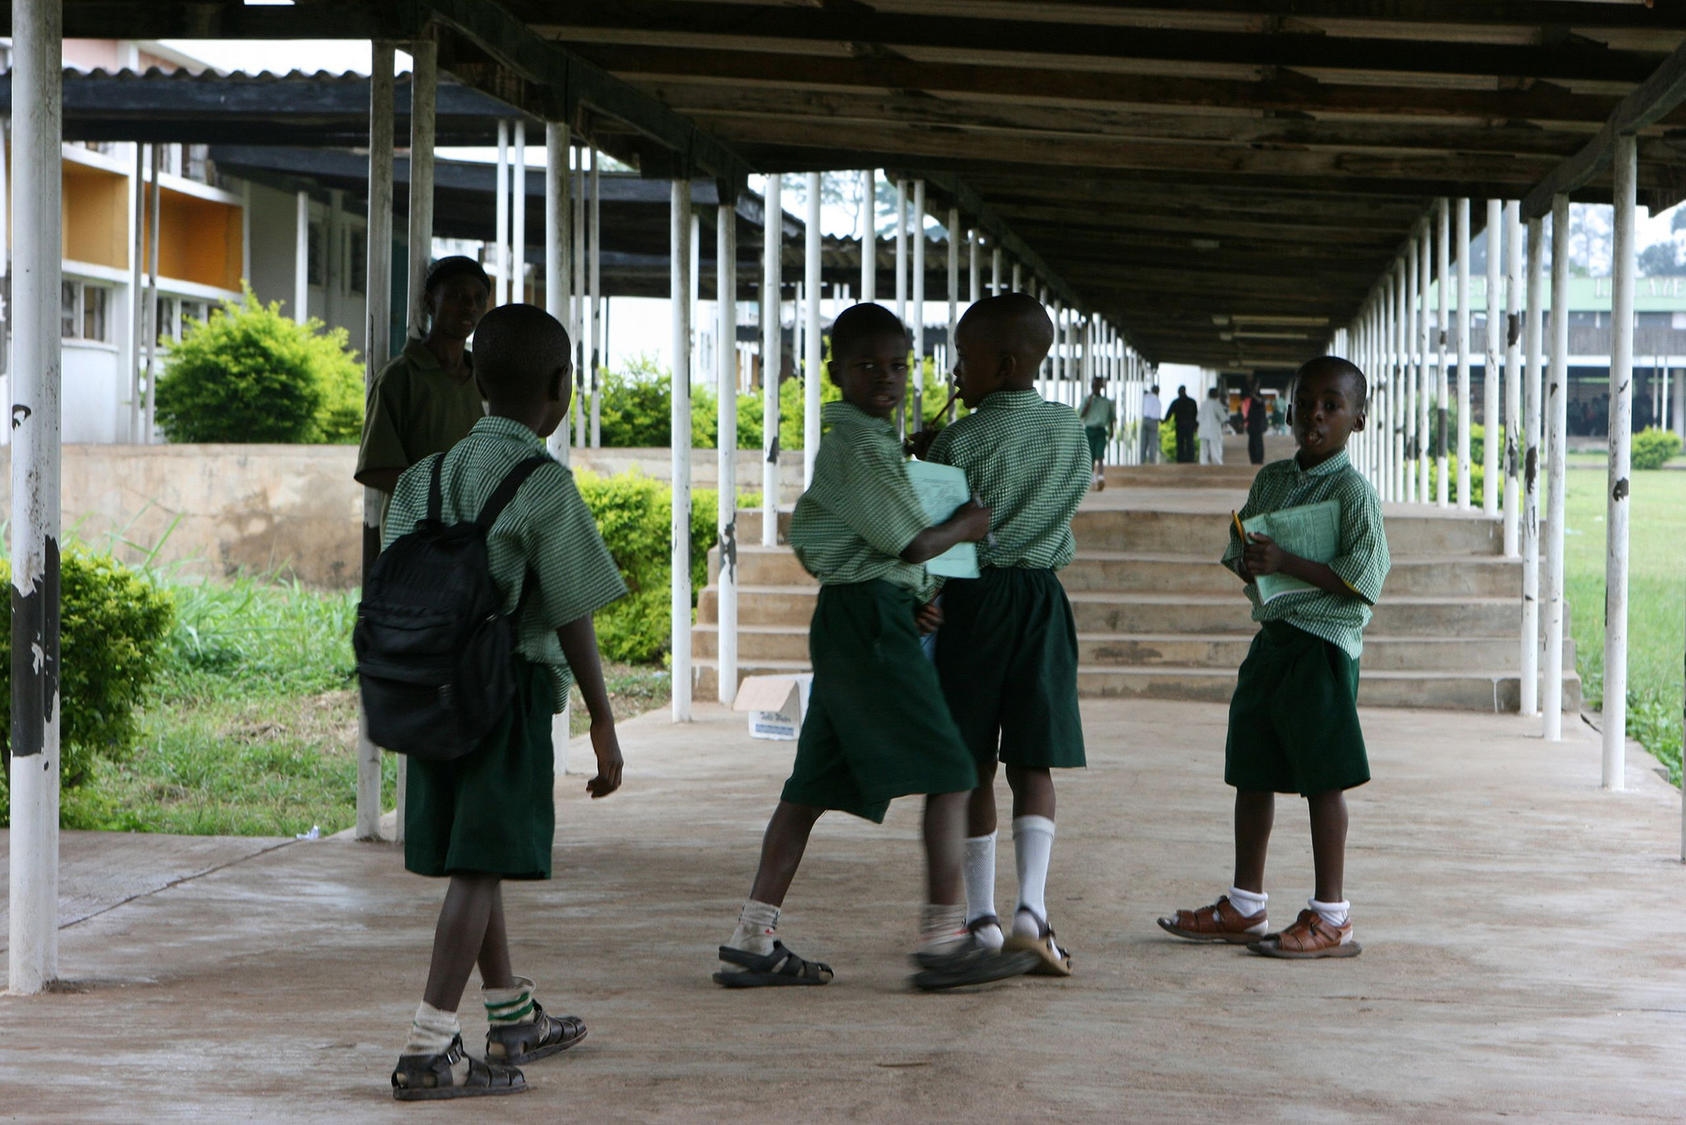 Schoolboys in Nigeria, where criminals have abducted more than 1,000 schoolchildren for ransom across the country’s north. The violence has suppressed school attendance and deepens a crisis for education in Nigeria. (Dolapo Falola/CC License 2.0)